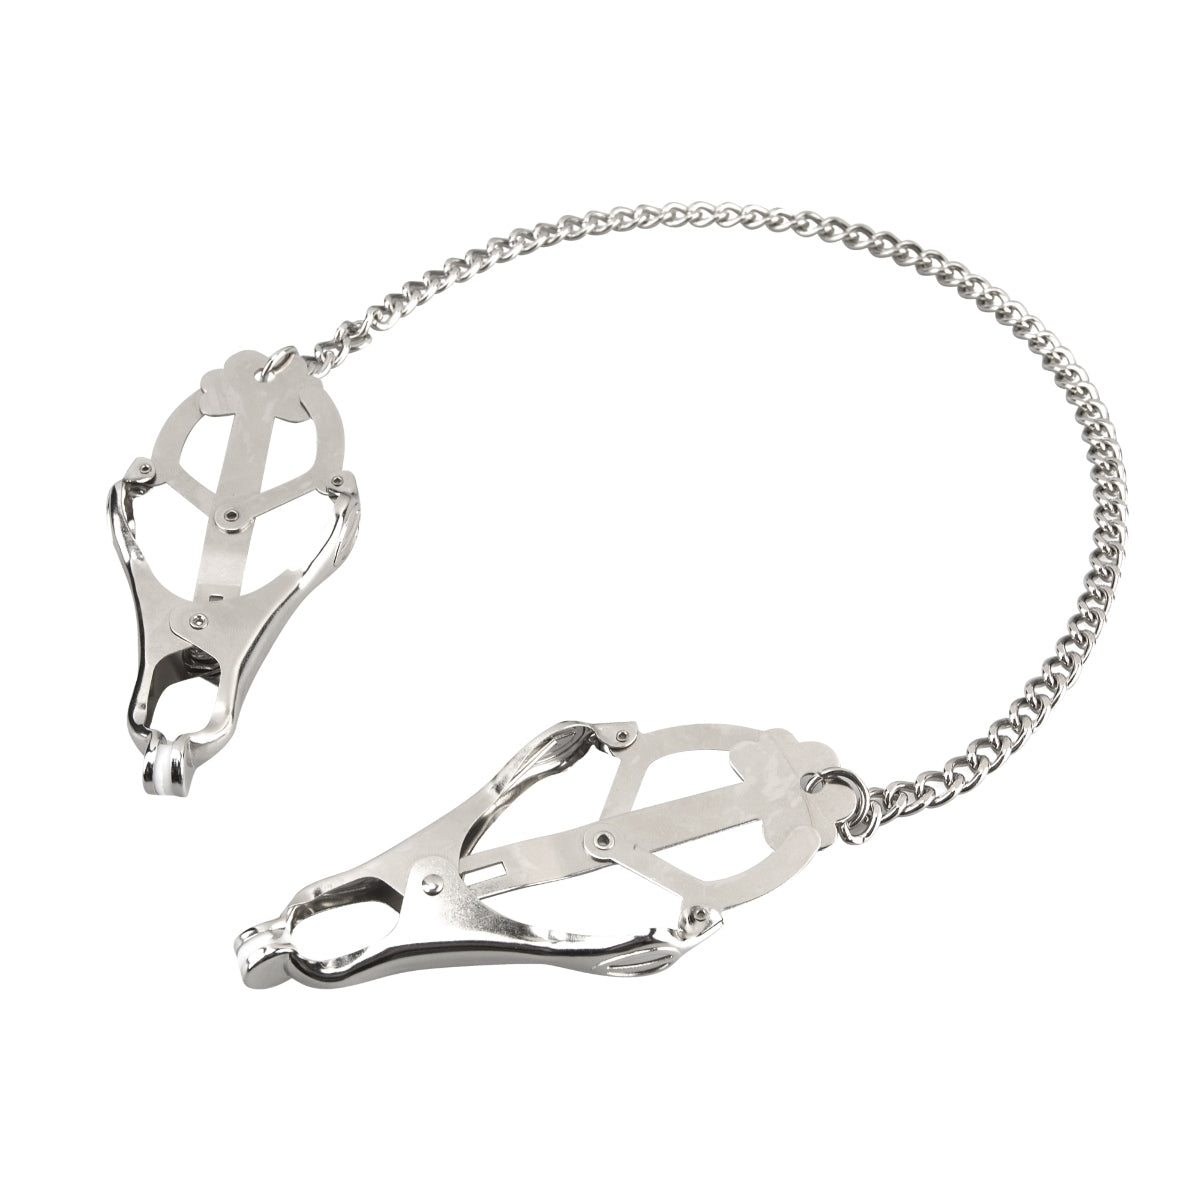 Lux Fetish Japanese Clover Nipple Clips Silver